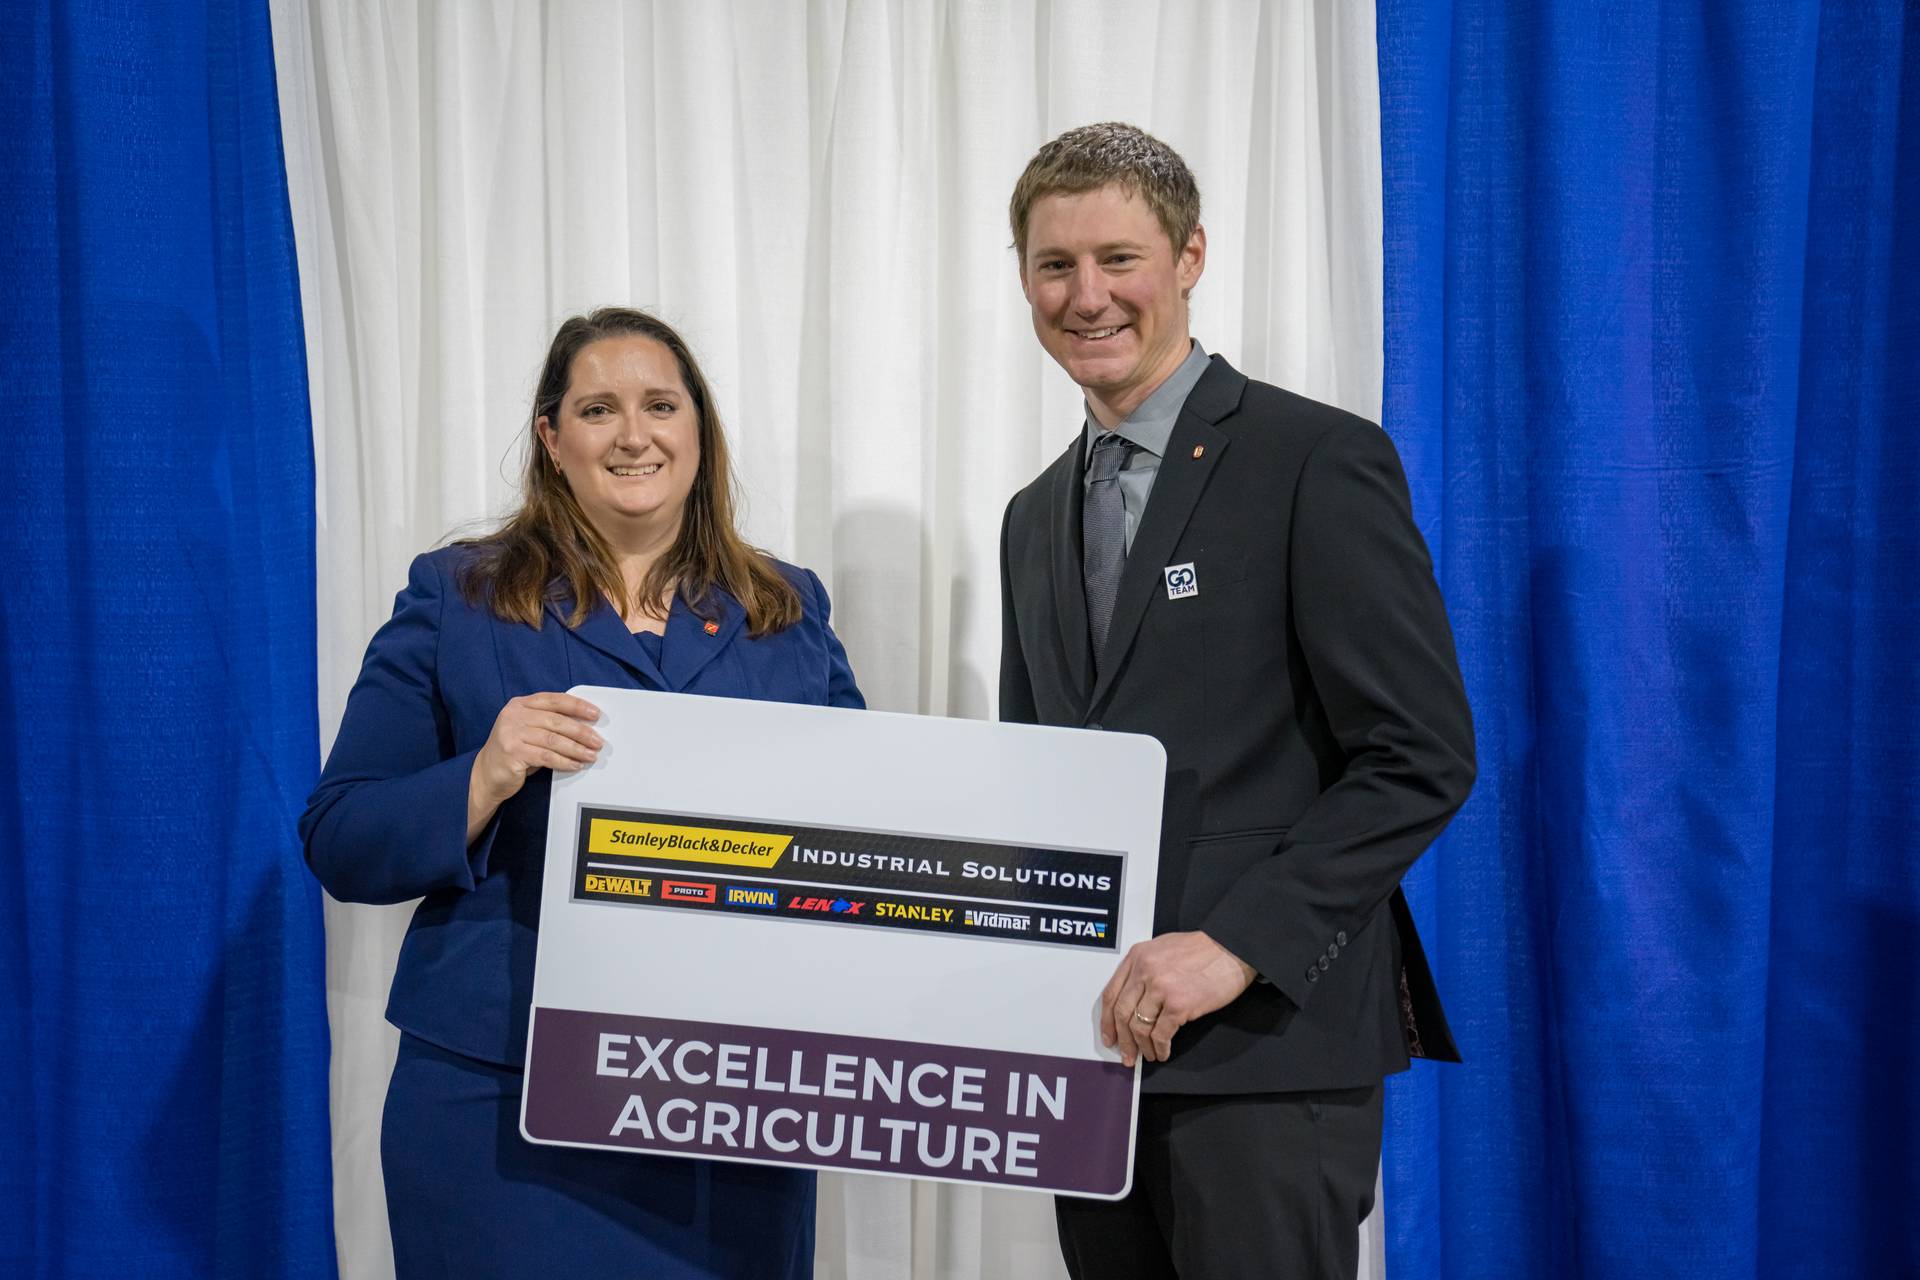 Kayla Griffith, from Lothian, Maryland, won third place in Excellence in Agriculture, receiving a cash prize from American Ag, numerous Case IH gifts, and Stanley Black & Decker merchandise.